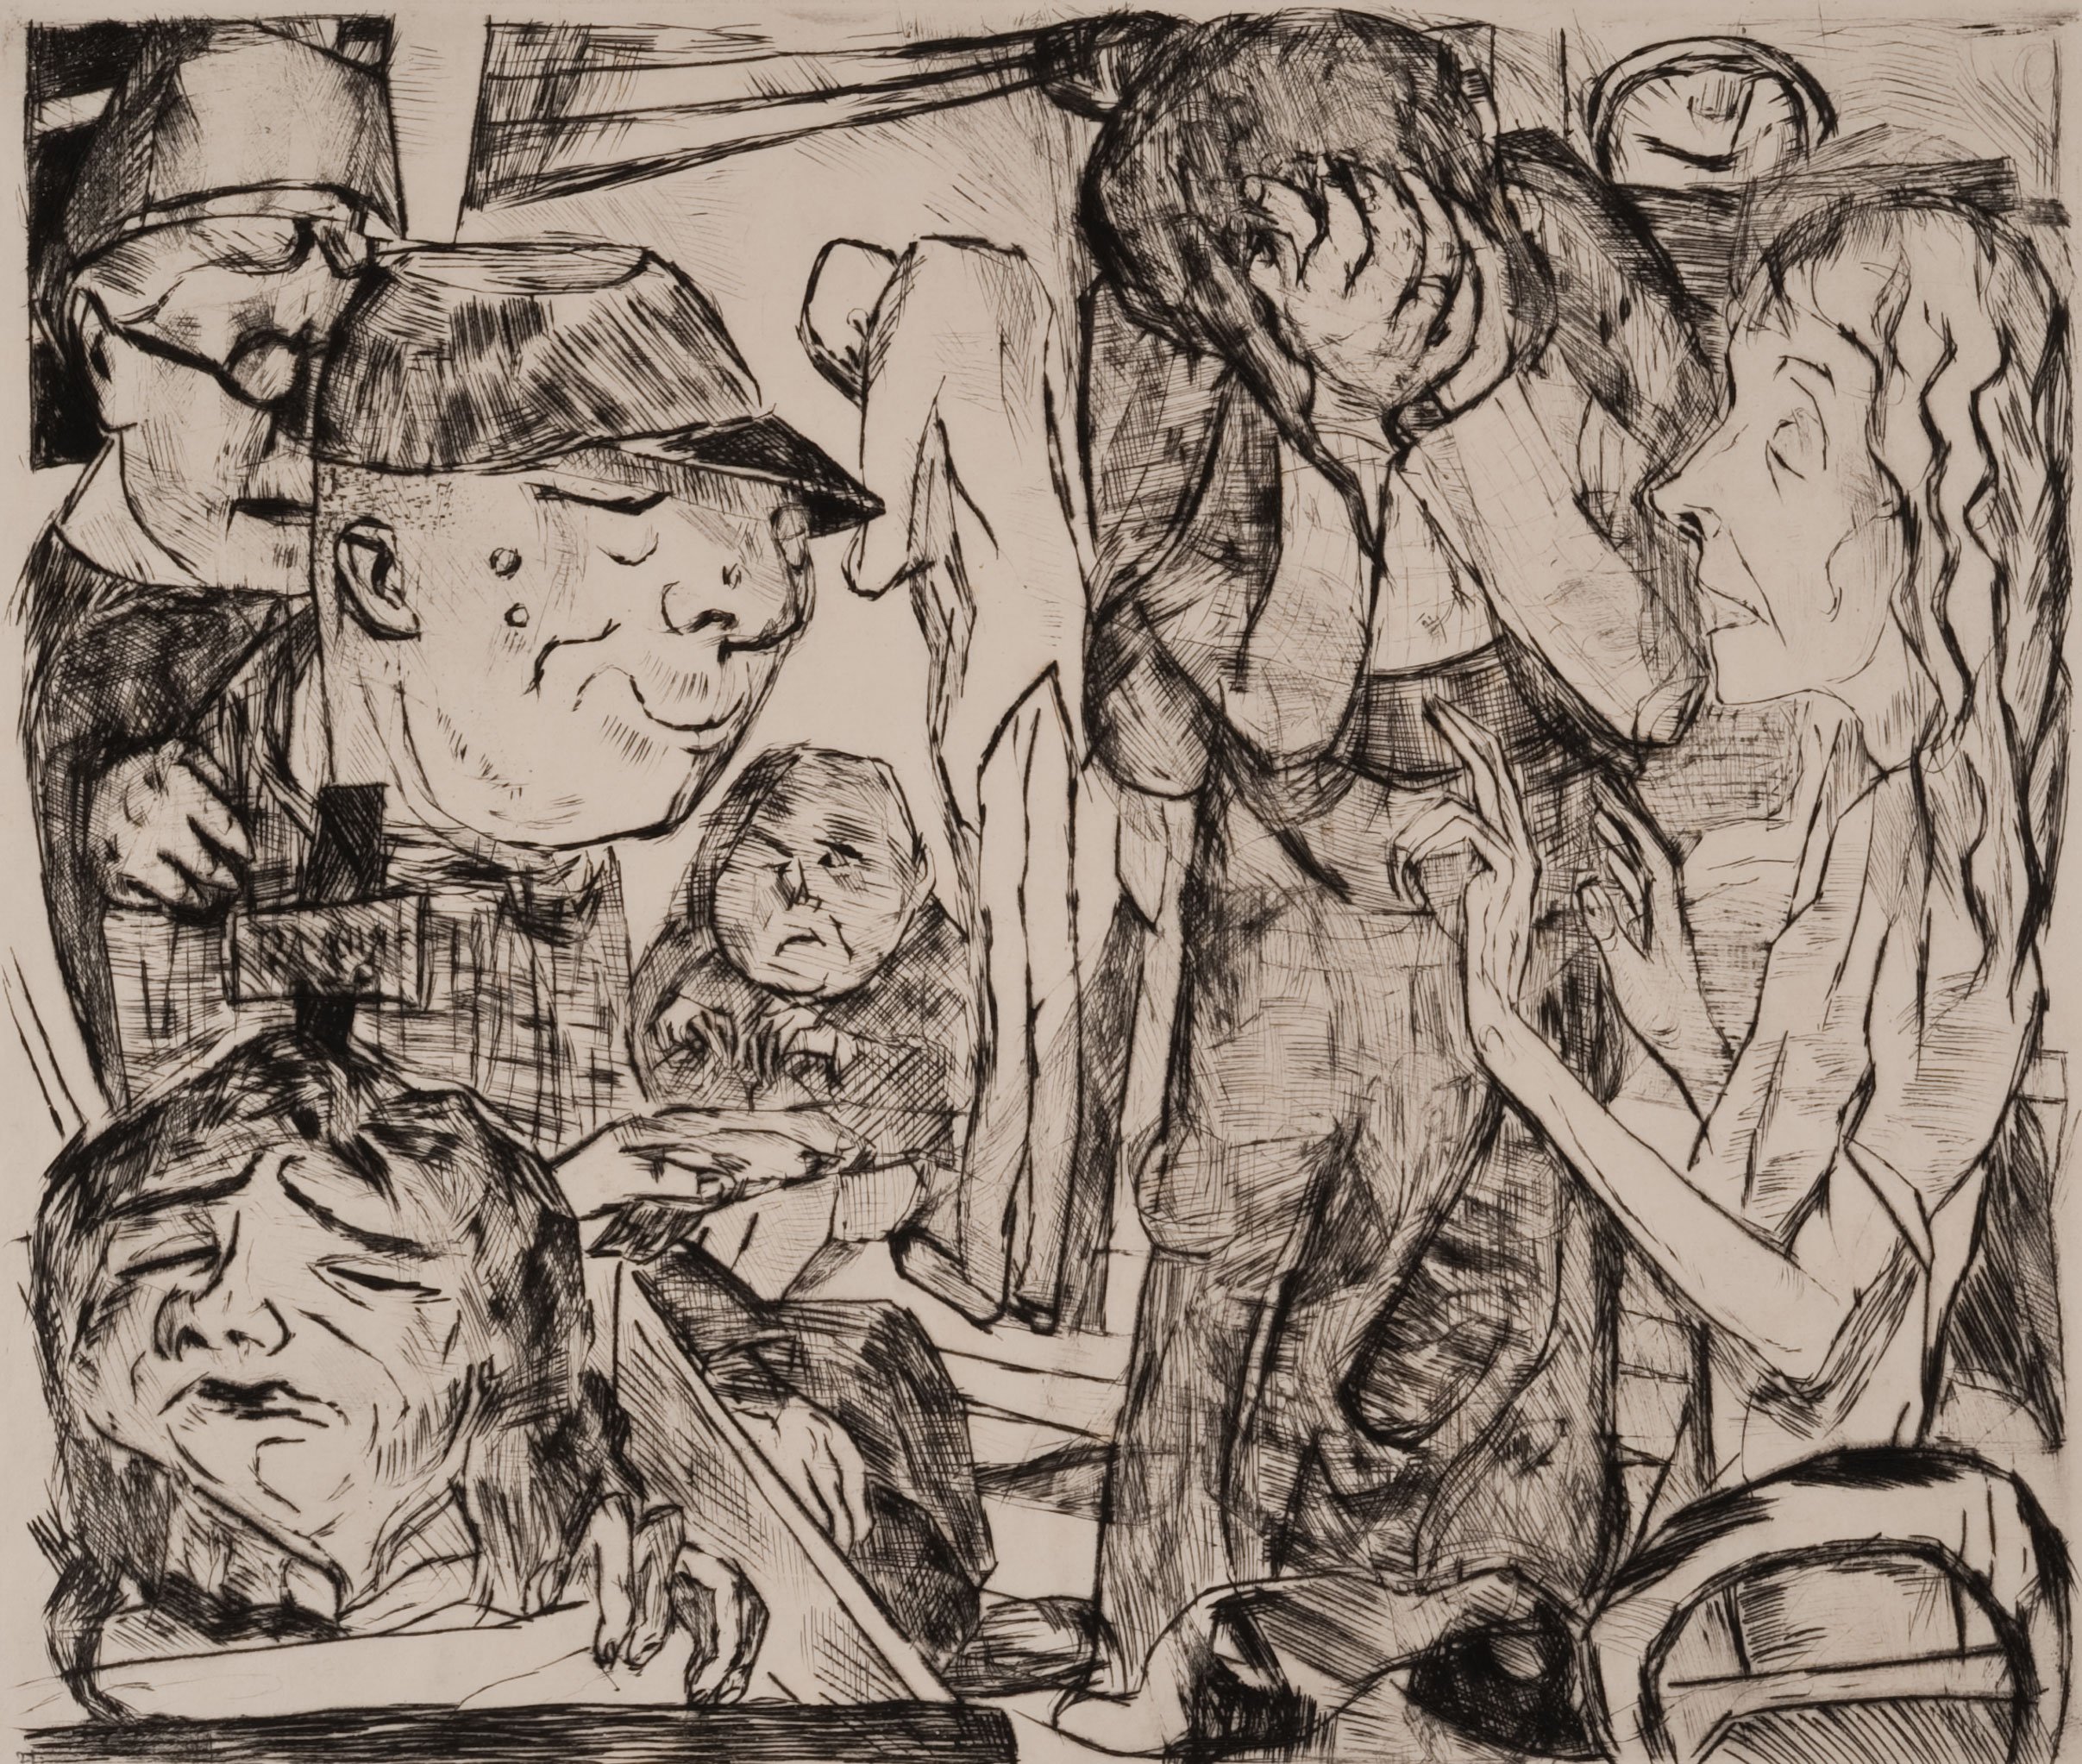  Max Beckmann (Germany, 1884-1950),  Madhouse (Irrenhaus)  from the portfolio  Faces (Gesichter) , 1918 (published 1919), drypoint etching on paper, 9 7/8 x 11 1/2 inches. Gift of David and Eva Bradford, 2009.31.4 